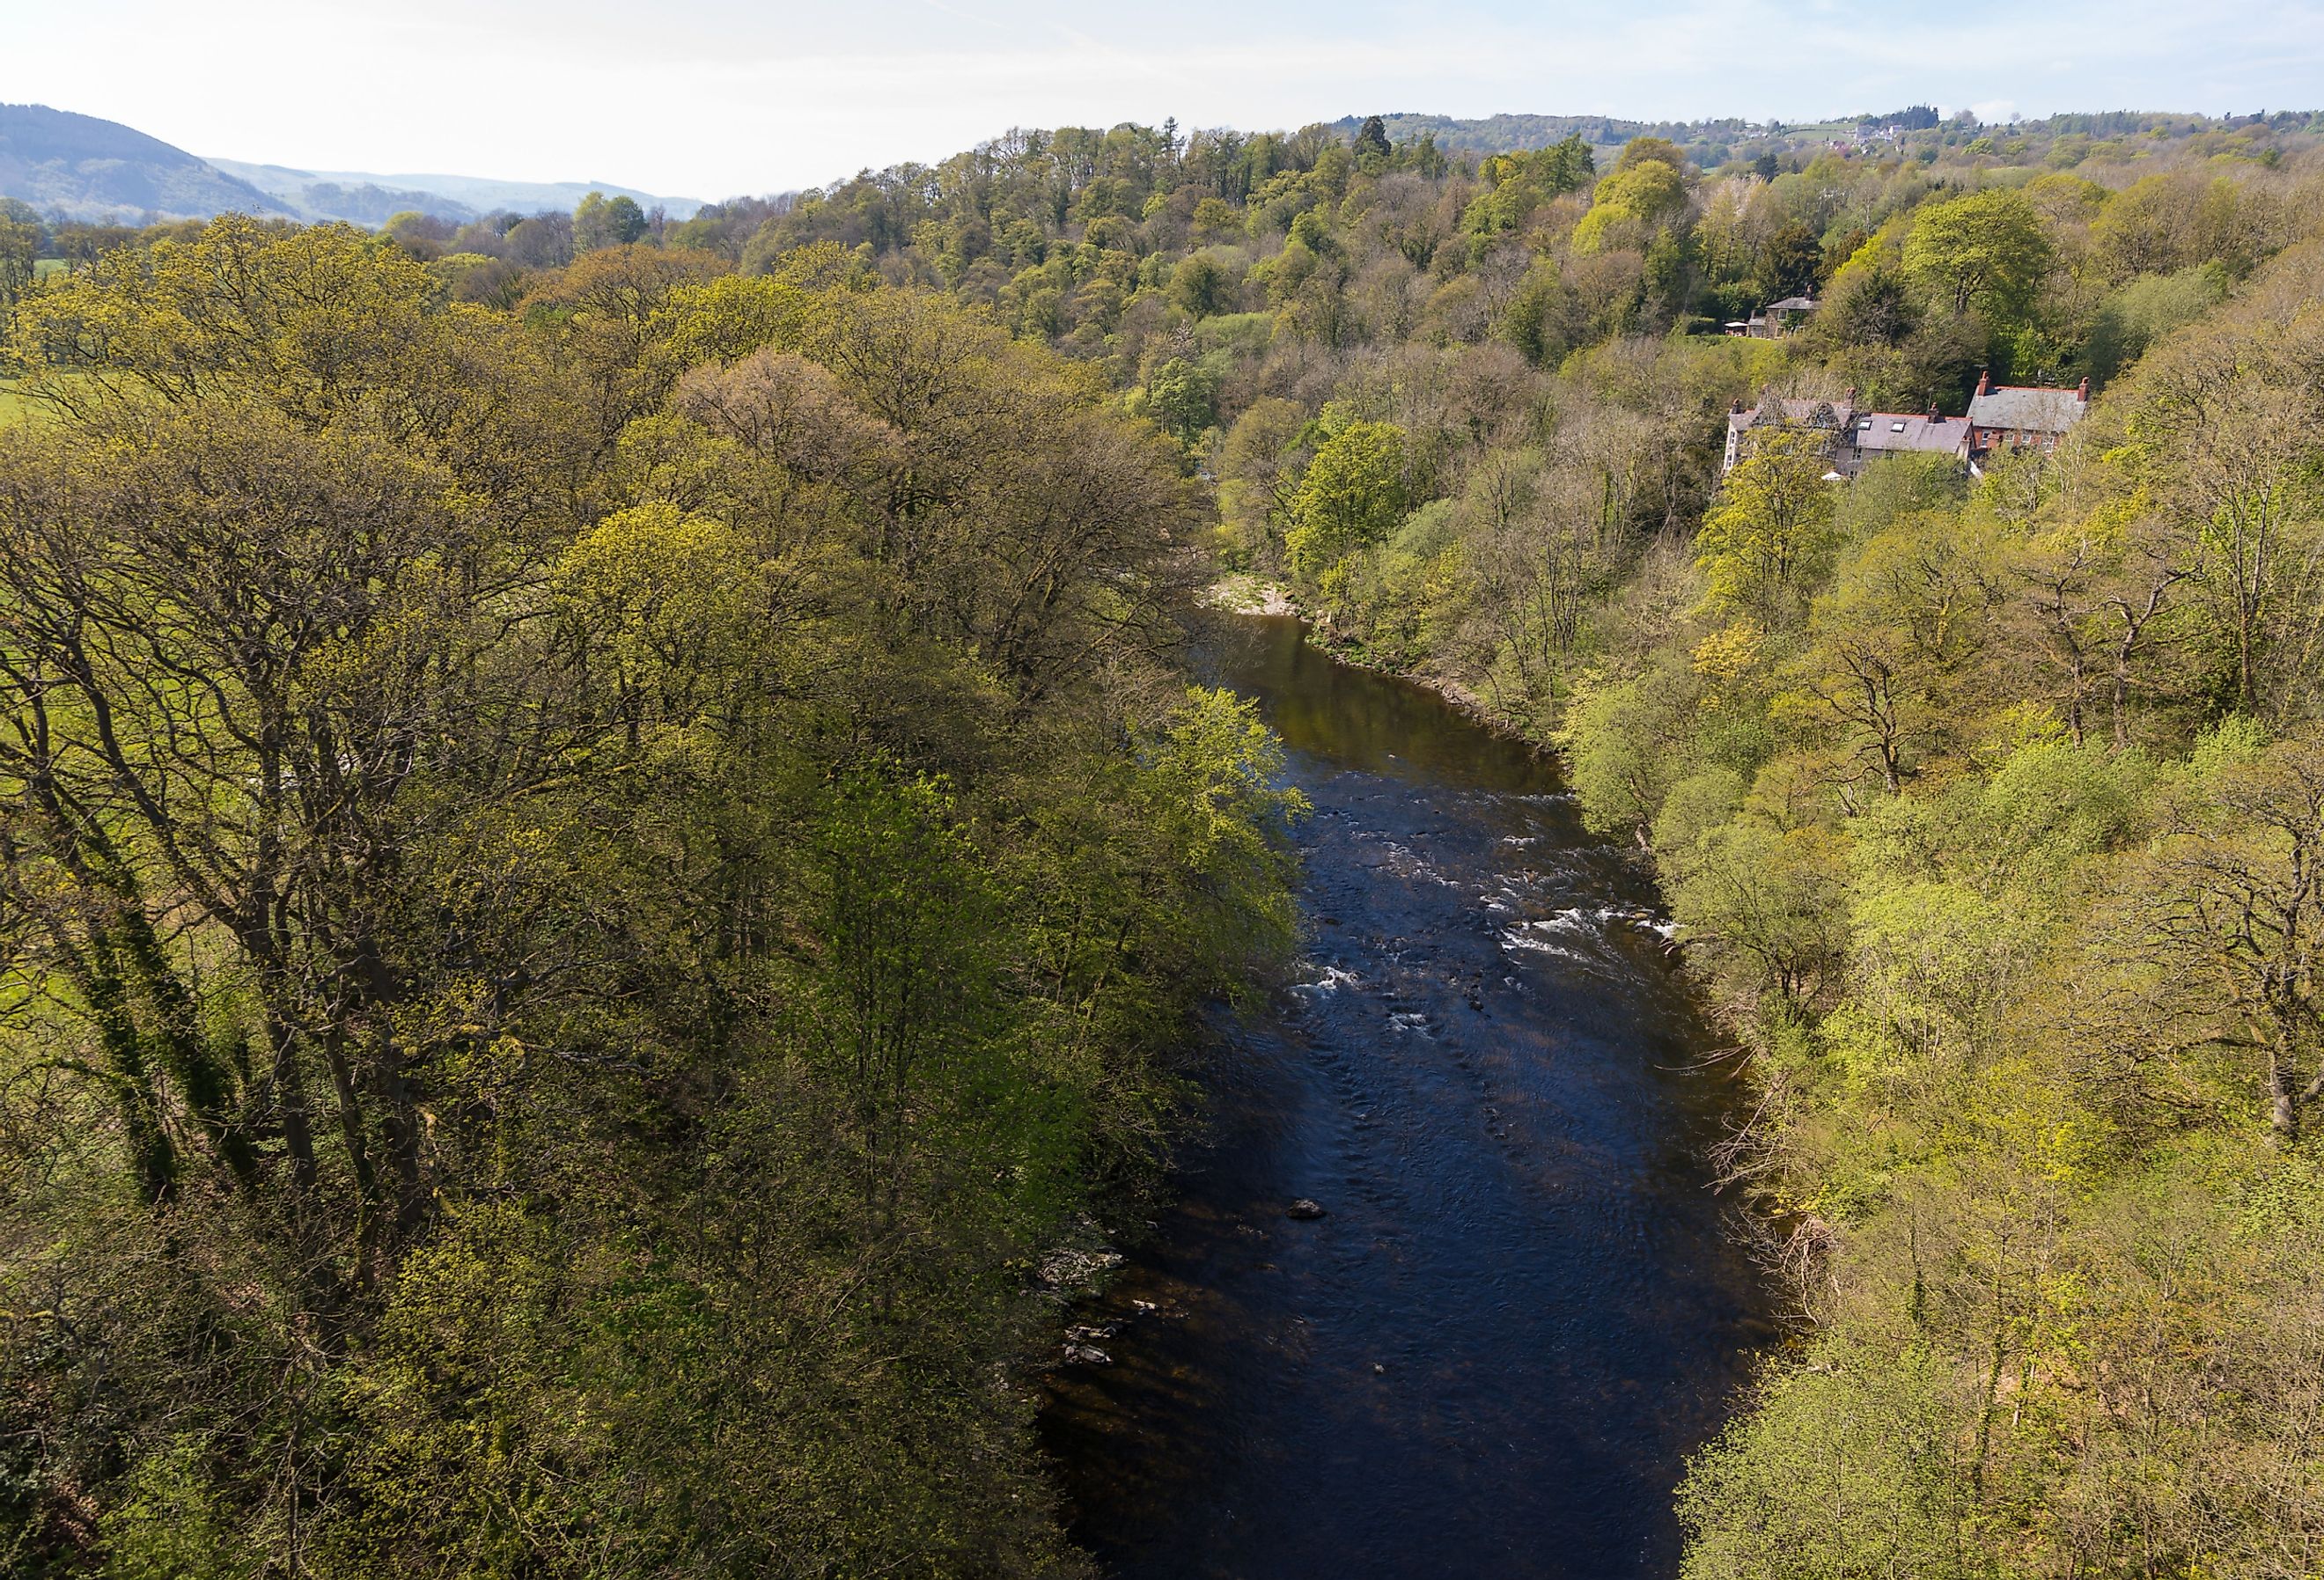 Aerial vew of the Dee River in Llangollen, Denbighshire, Wales. Green forests line the river. Image credit Tomasz Wozniak via Shutterstock.